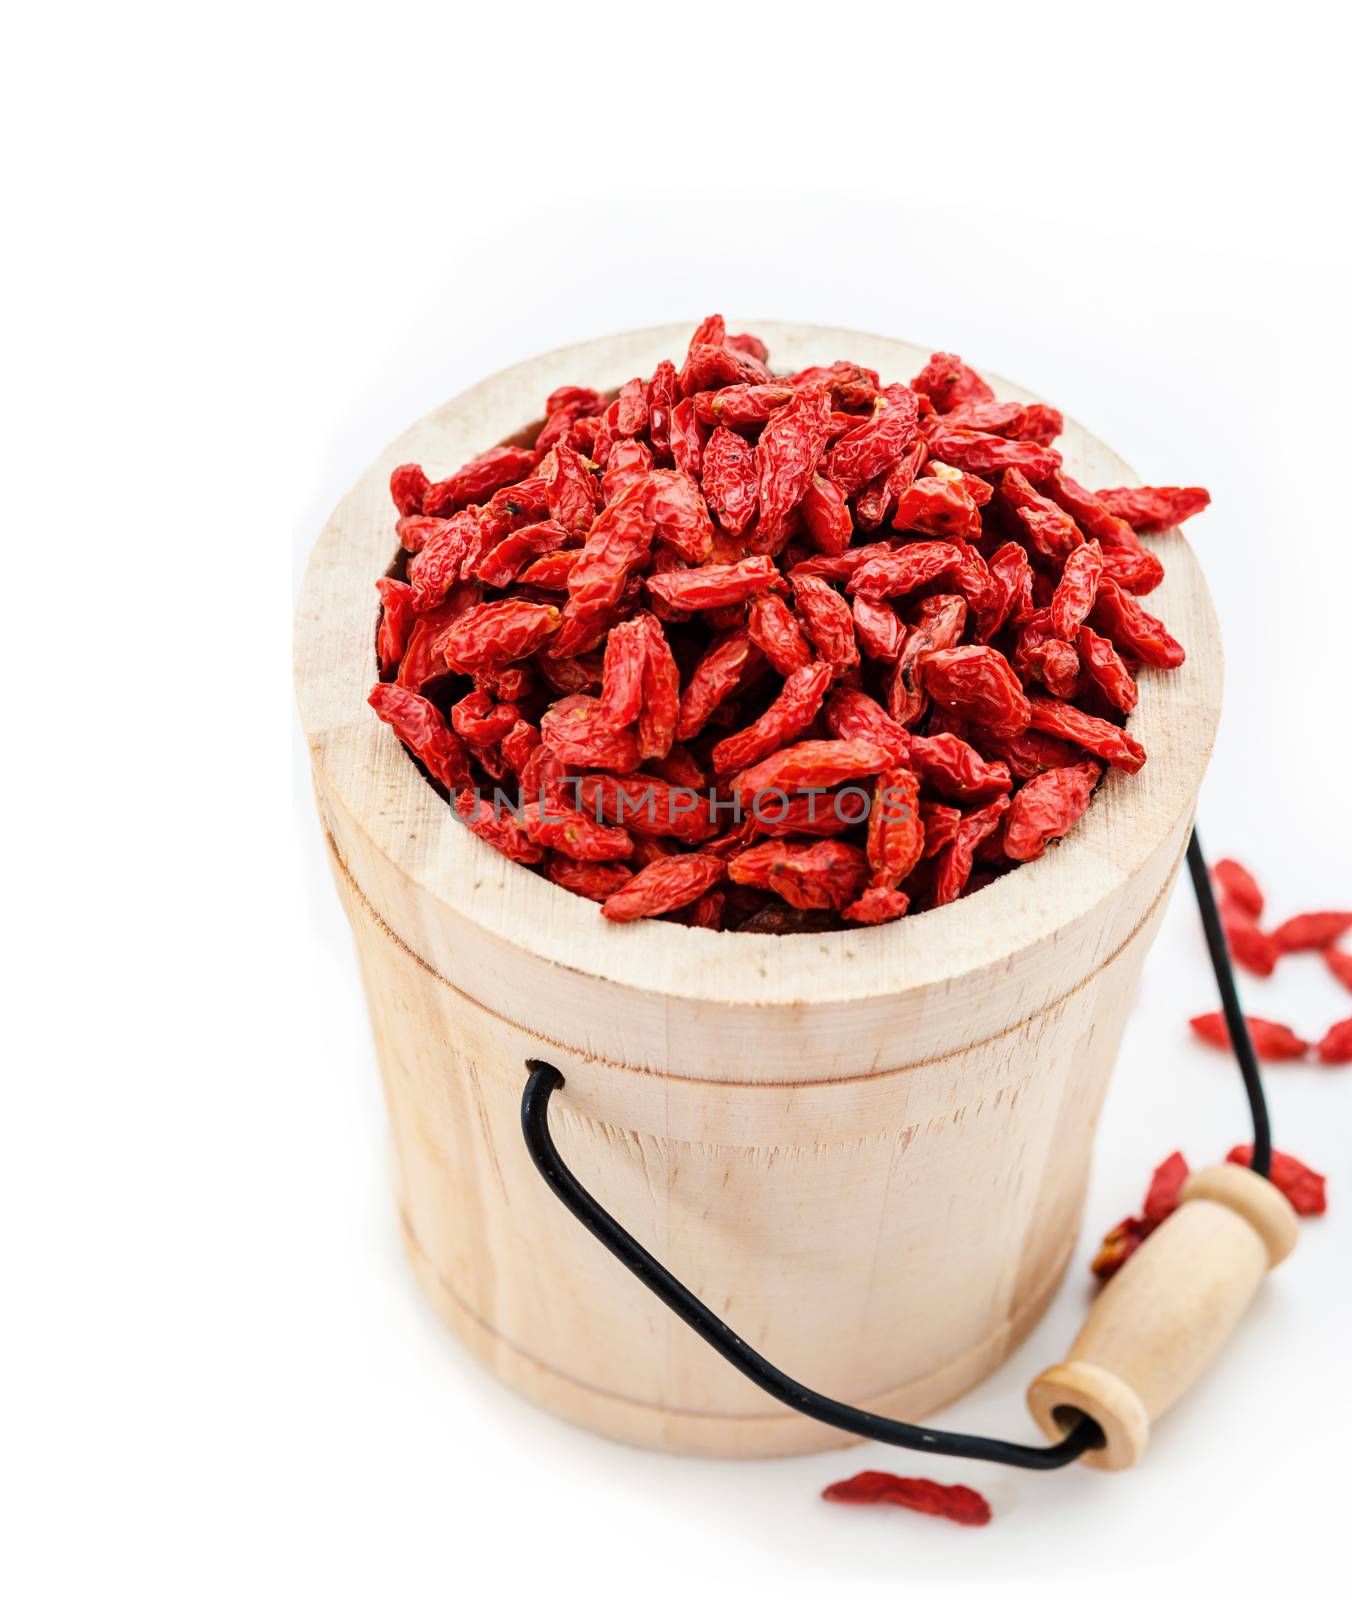 Red dried goji berries, wolfberry or lycium, chinese herbal medicine in wooden bucket on white background.